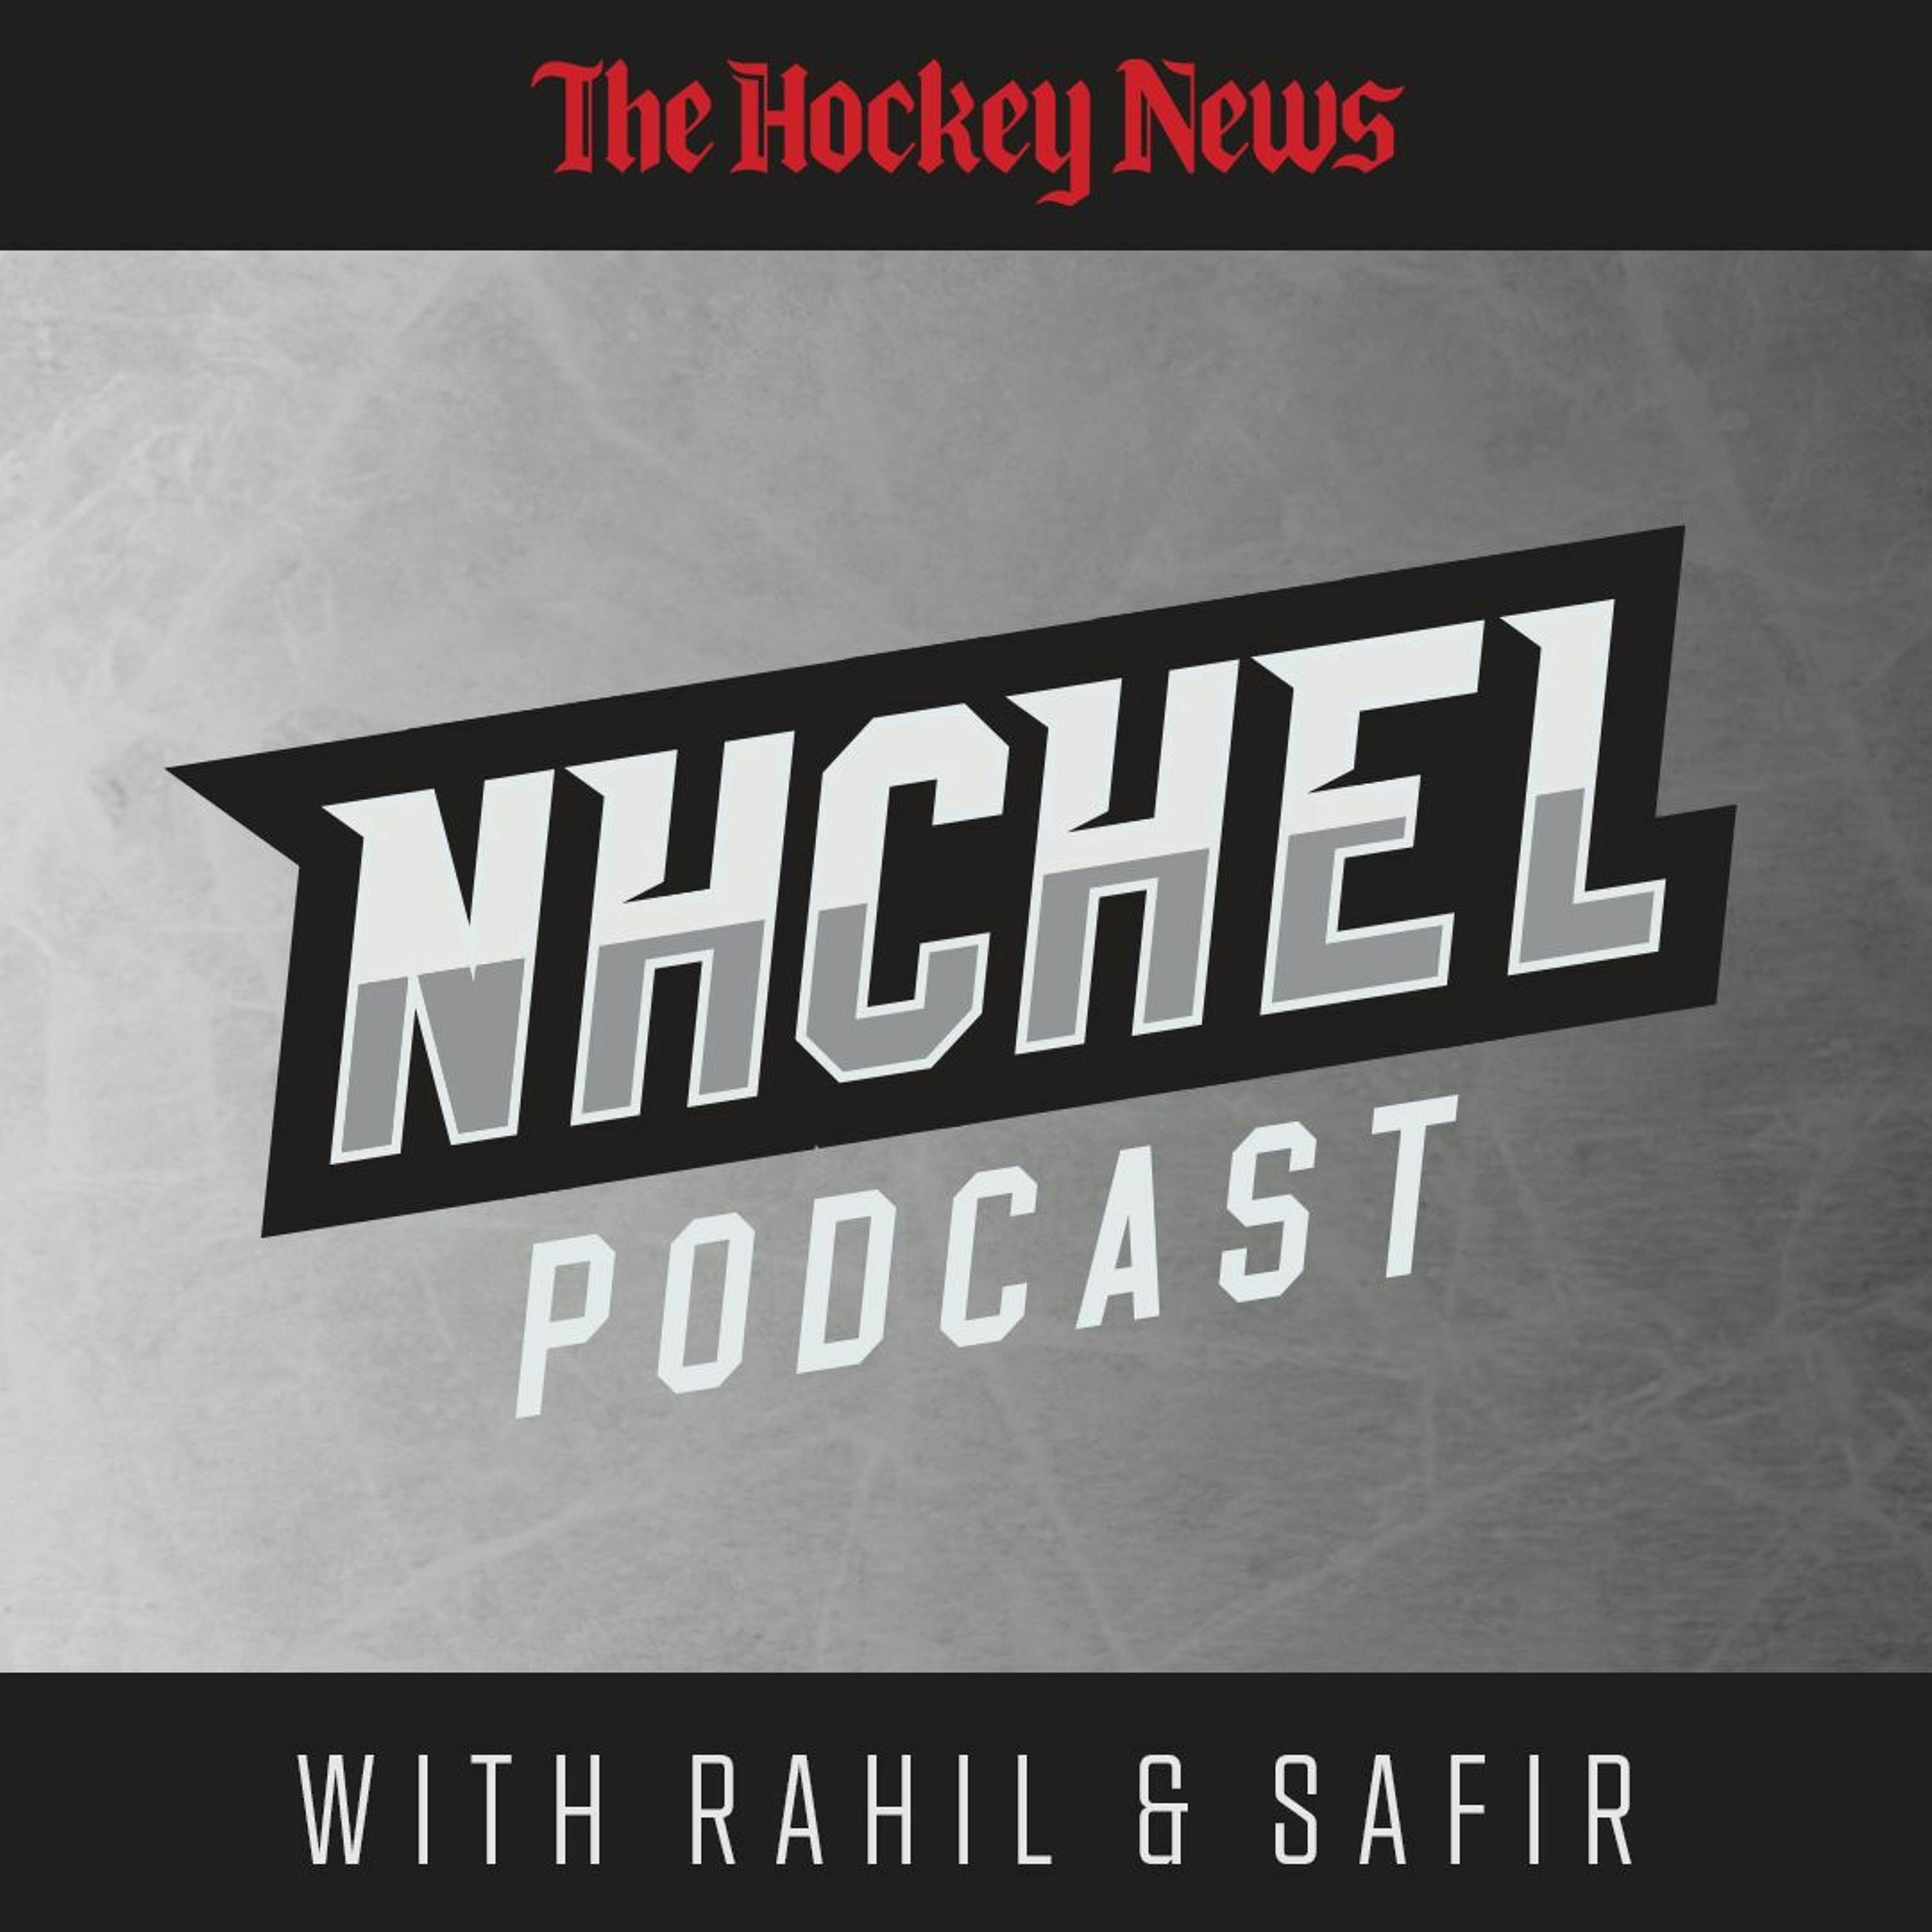 NHChel Podcast: Episode 6 – Power Rankings Are Fun